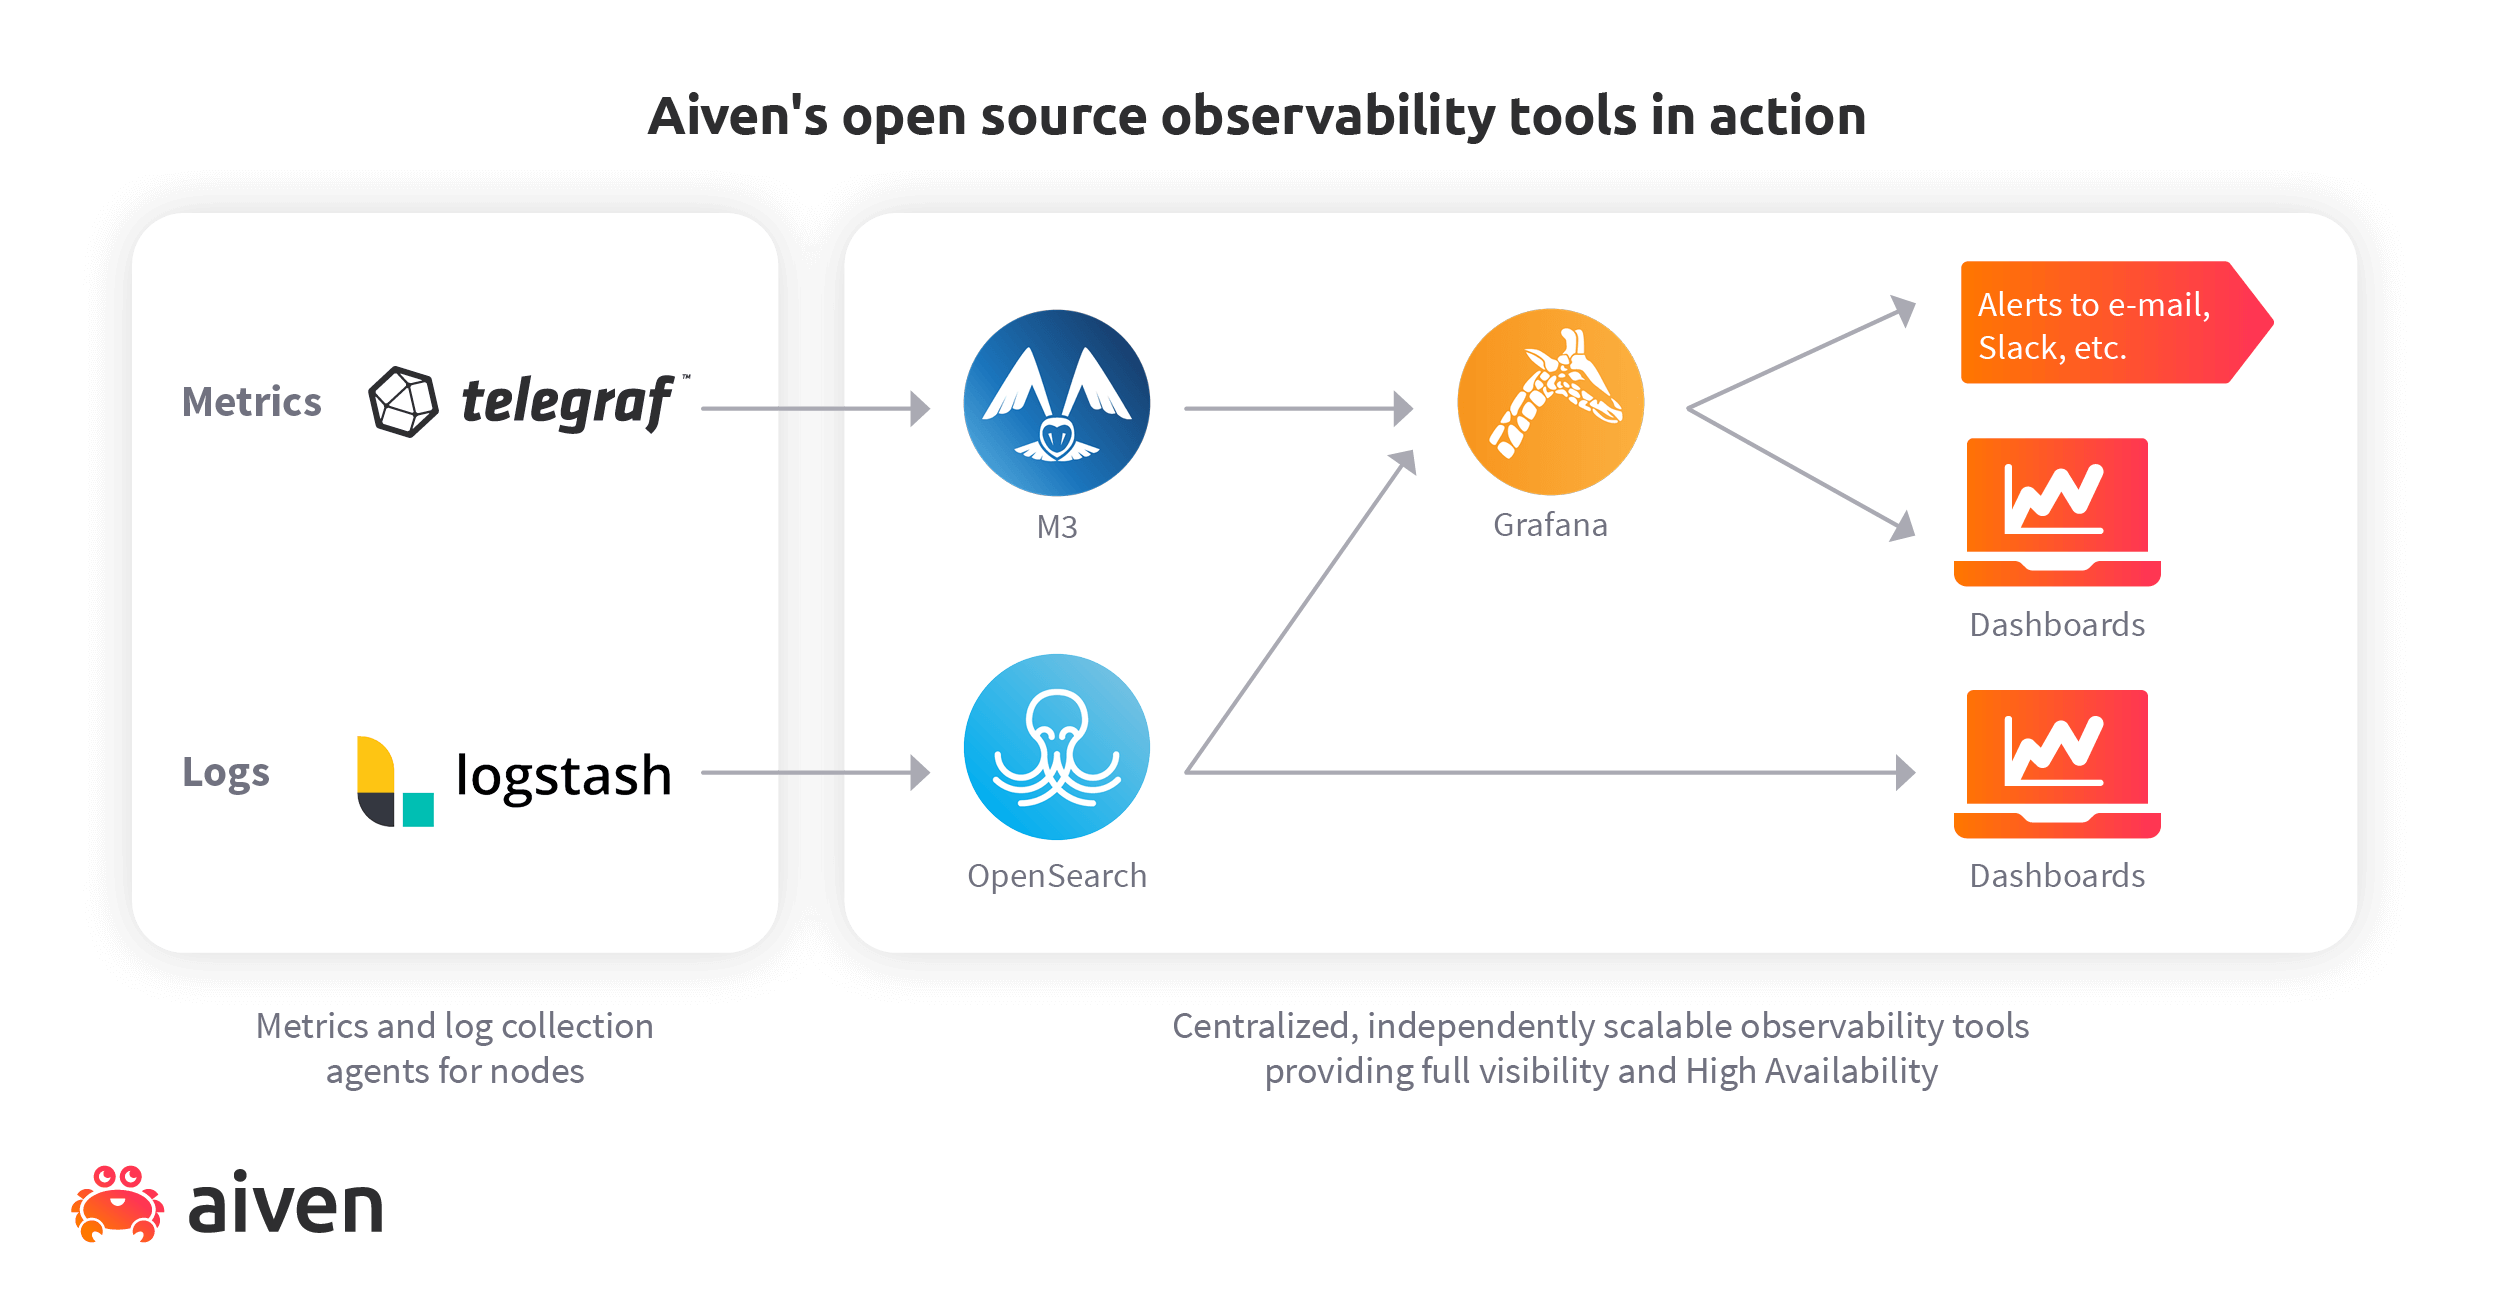 Aiven's open source observability tools in action